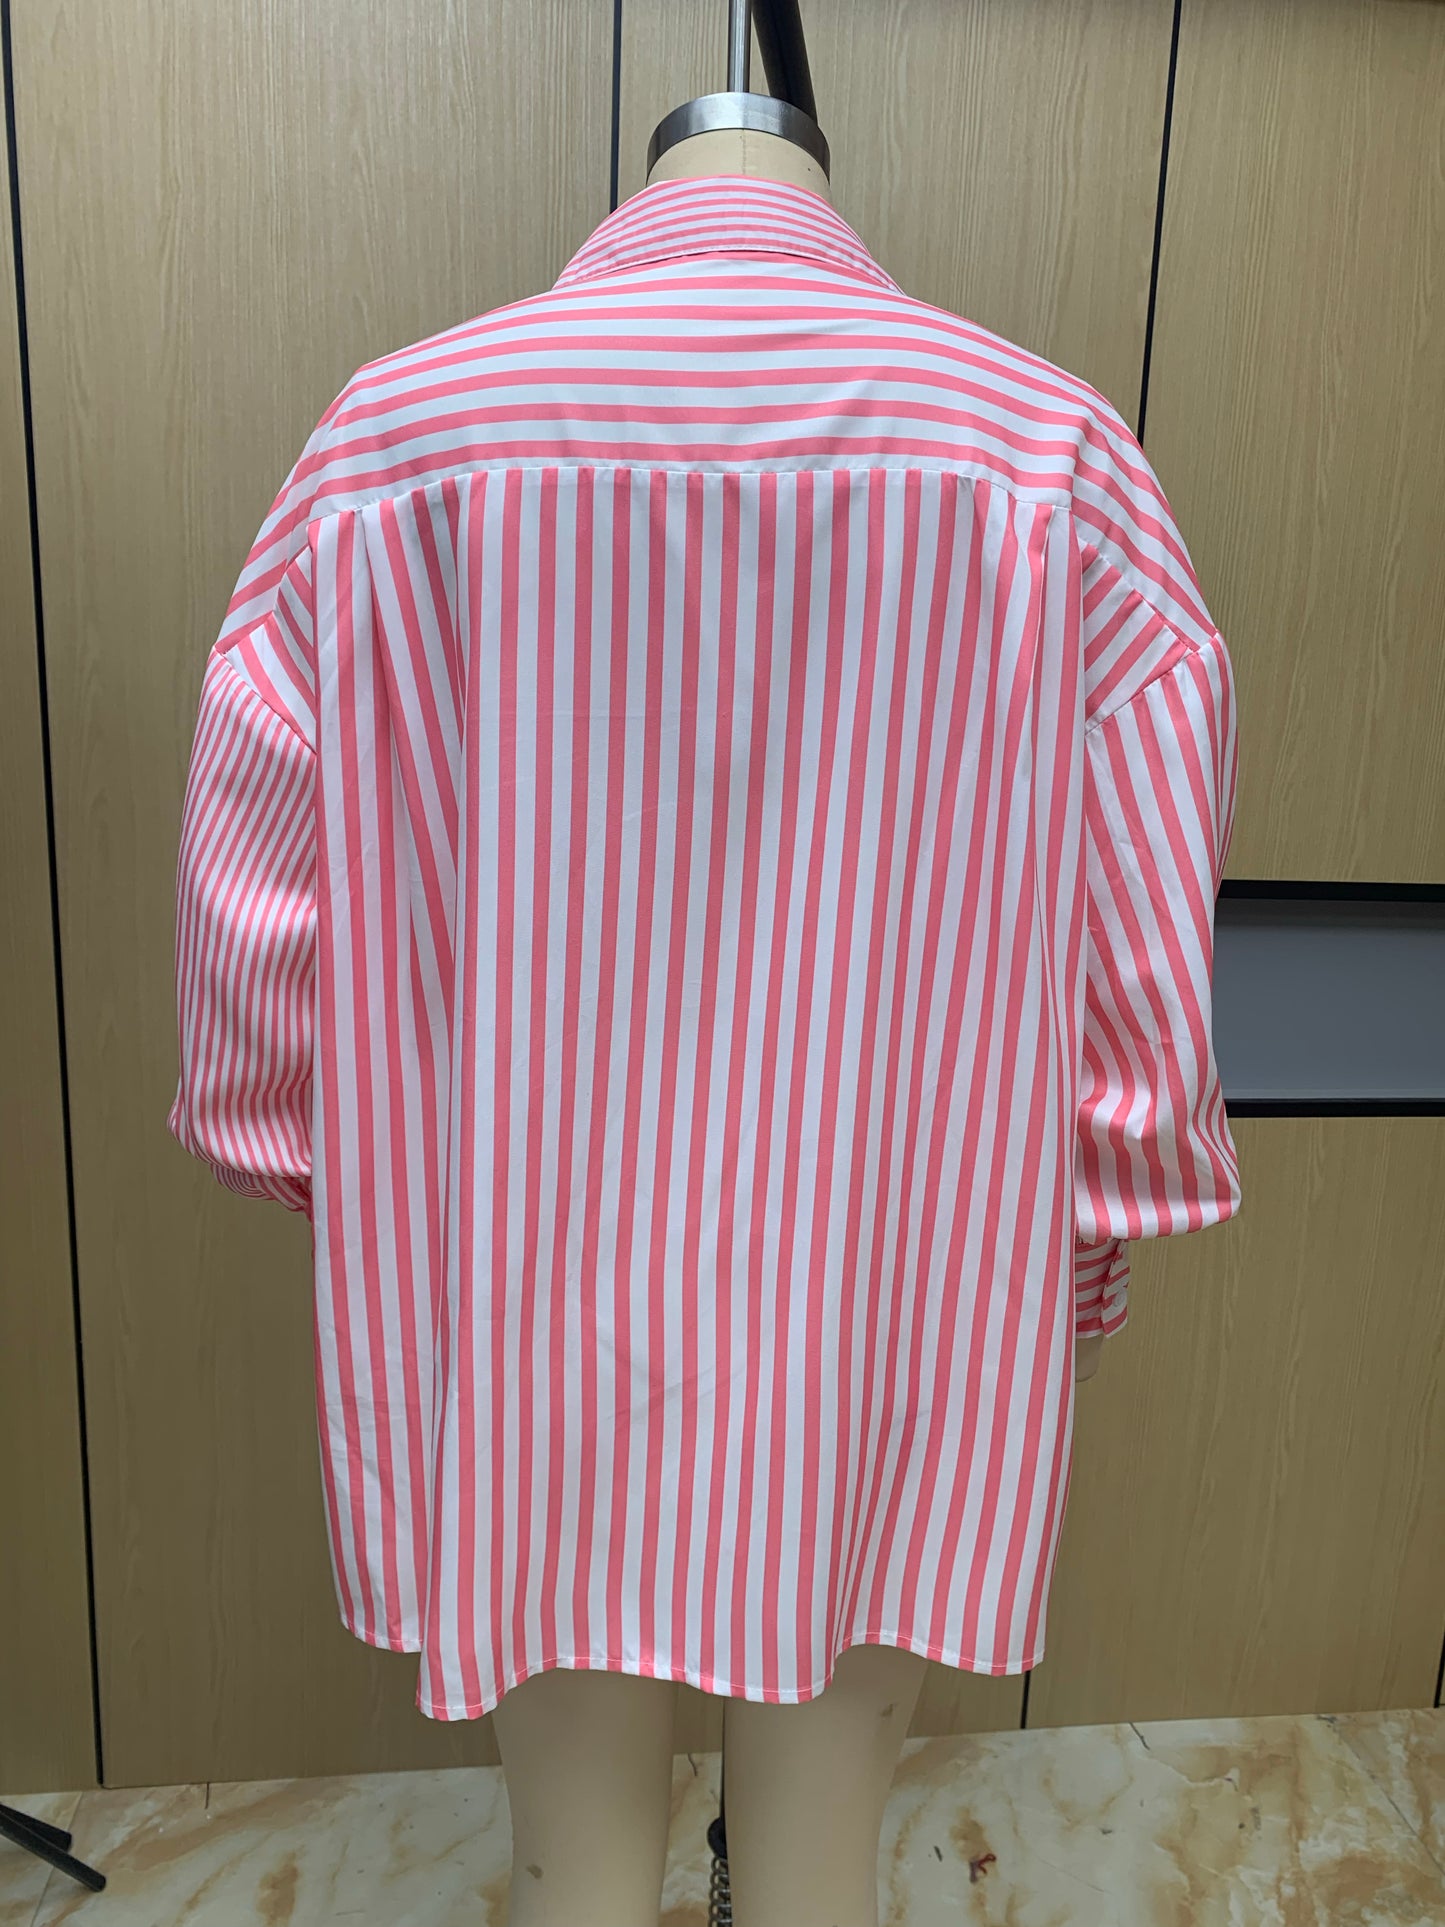 Collared Loose Long Sleeve Striped Shirt